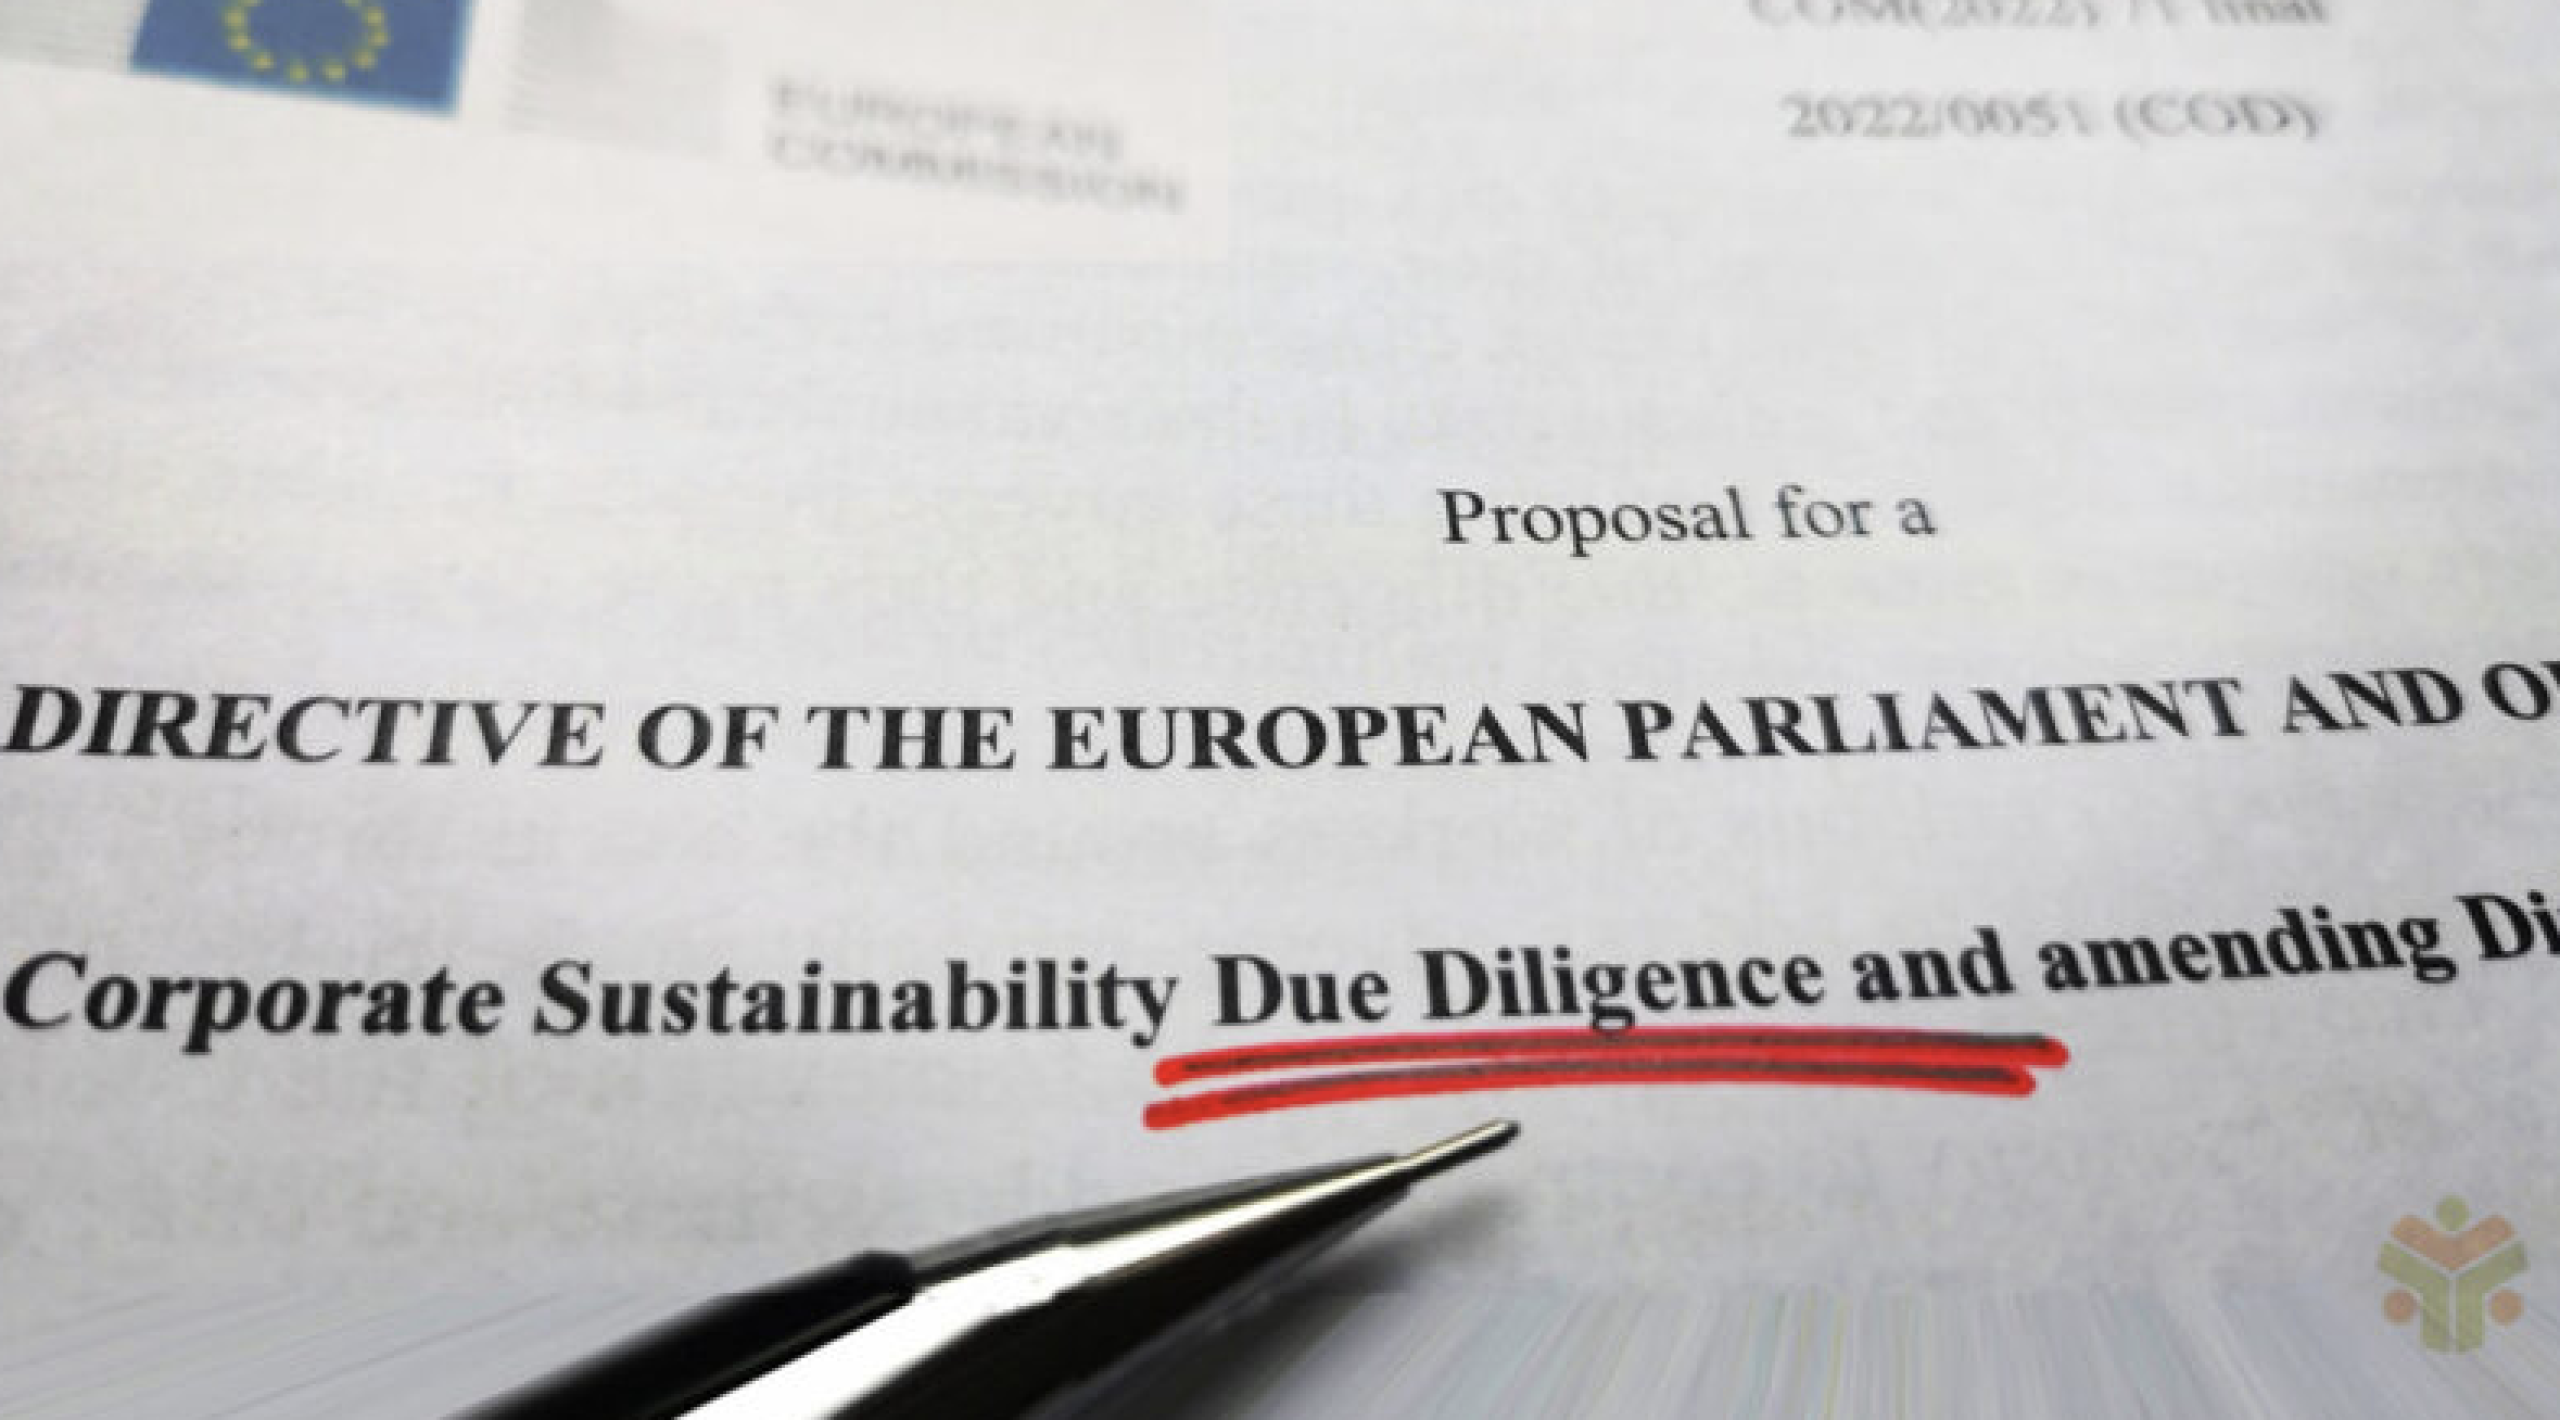 “Rise to the occasion and ensure a strong EU Corporate Sustainability Due Diligence Directive”